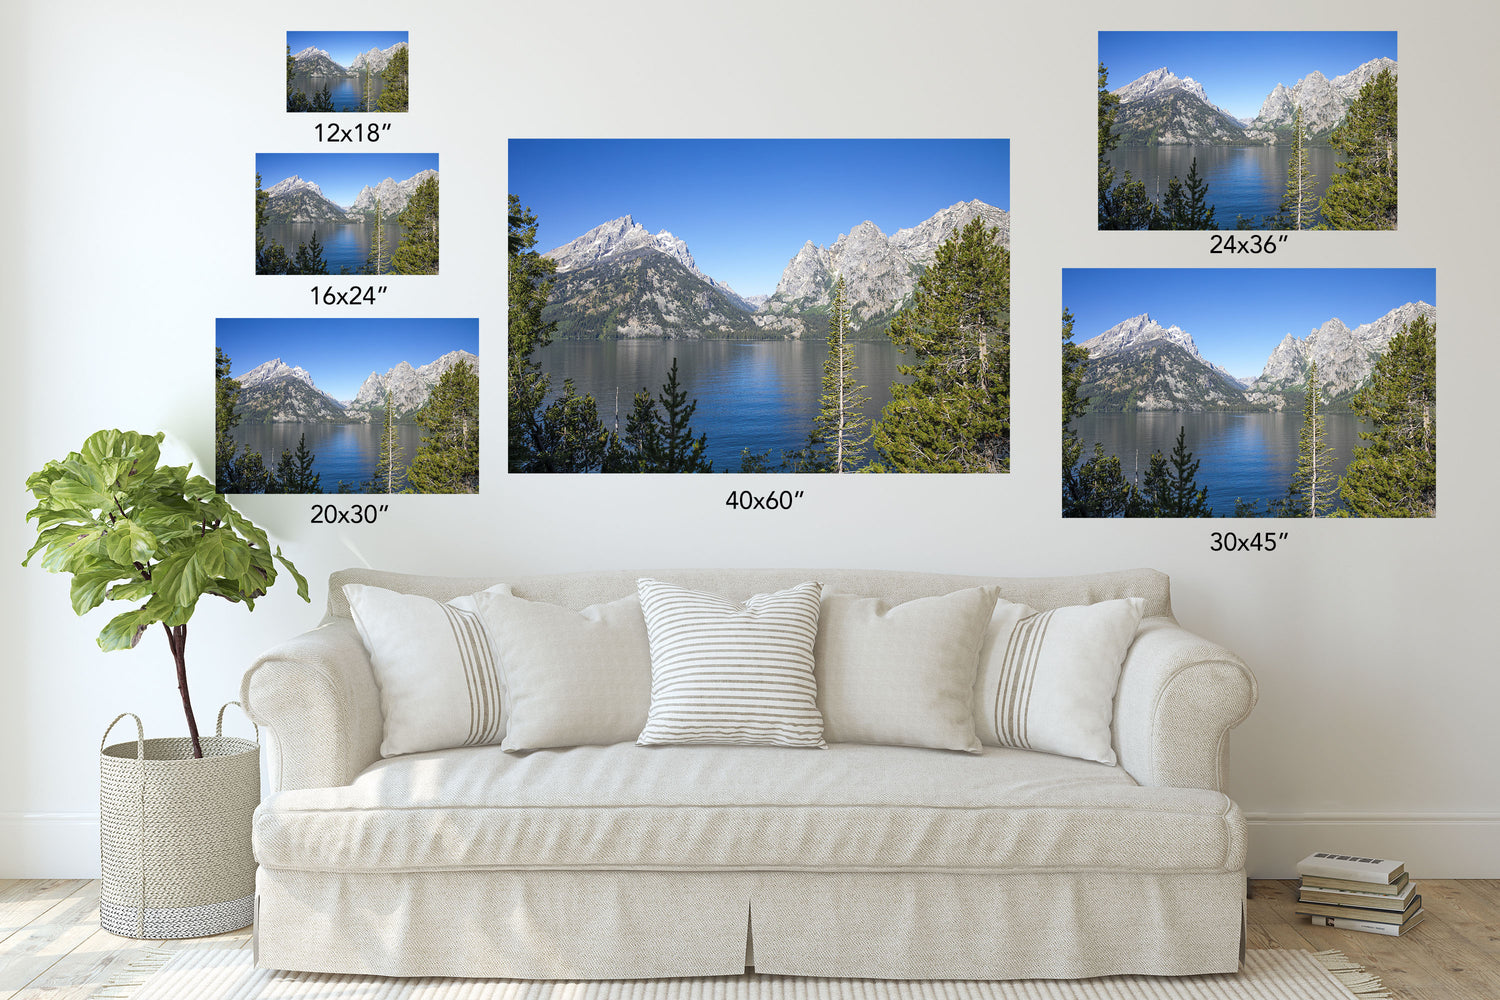 Sizing example for large pieces of art by Lisa Blount Photography